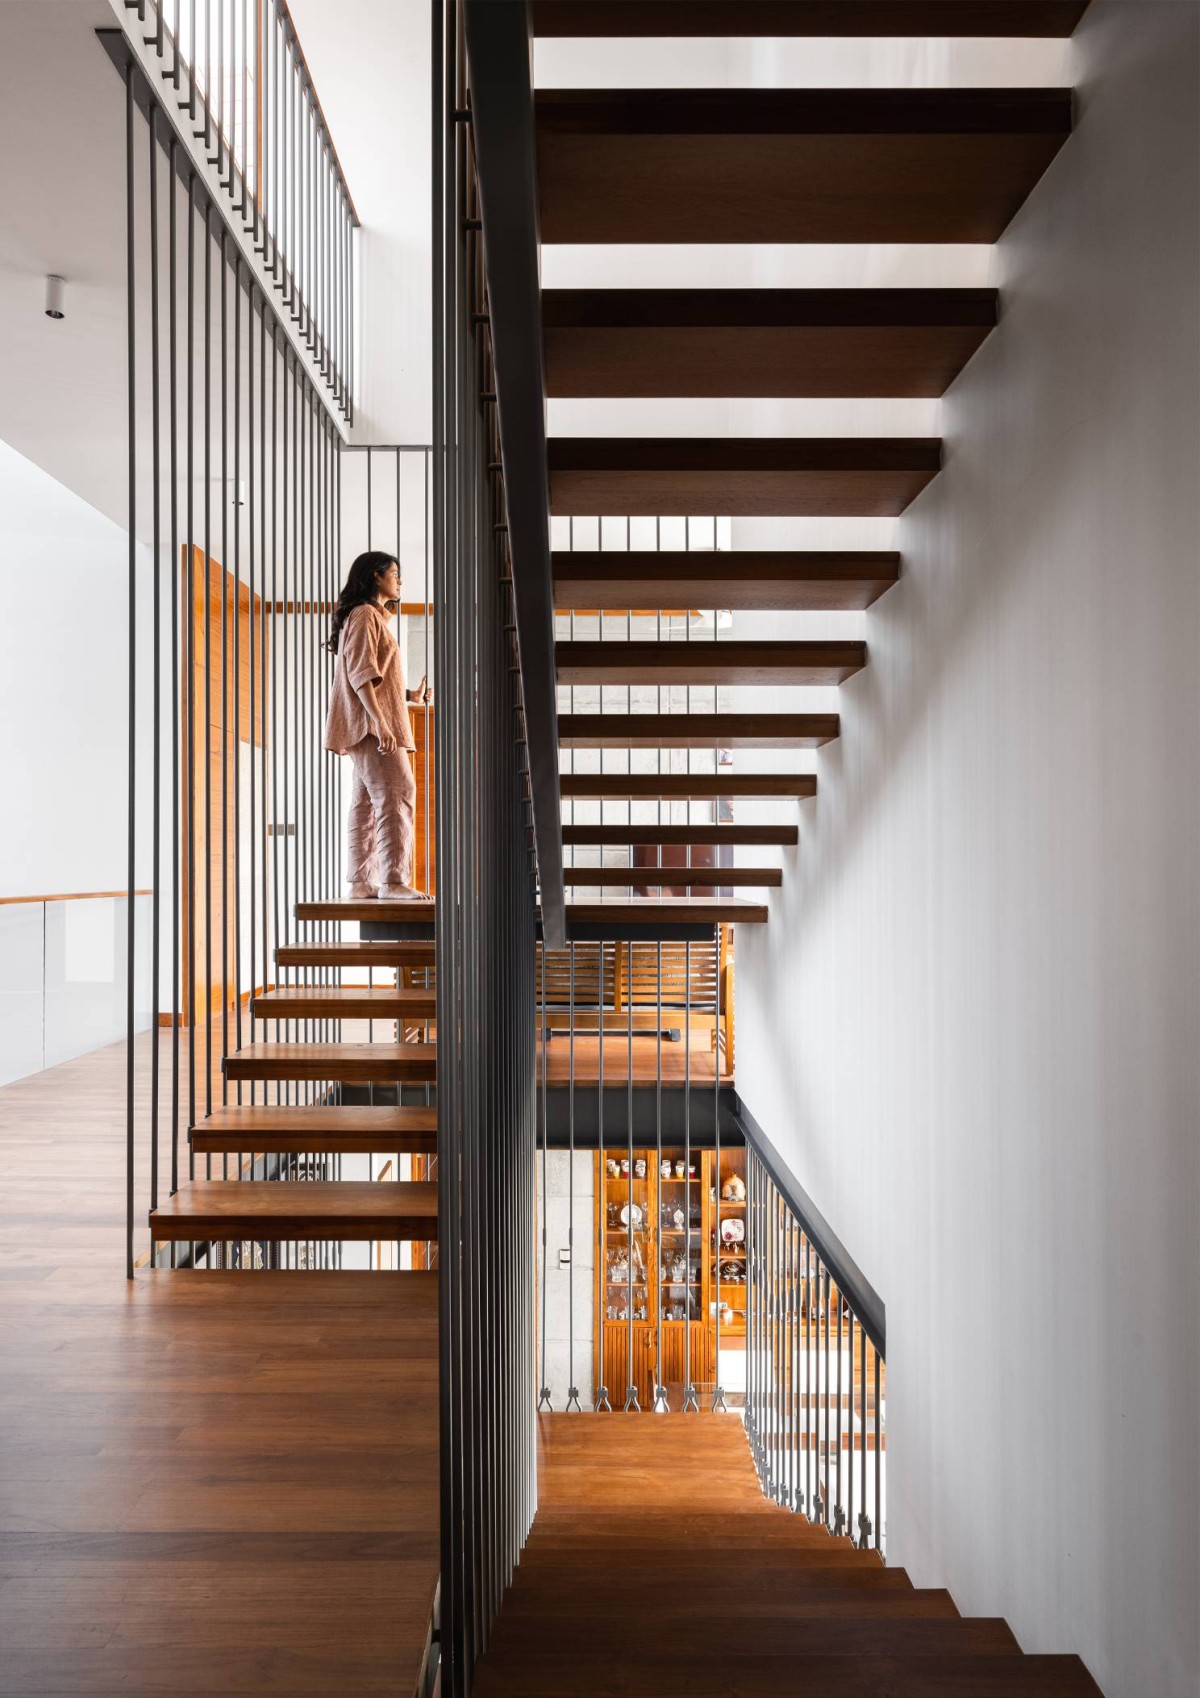 Staircase of Carving a COURT OF QUIETUDE in a Bustling Cityscape by Mudbricks Architects